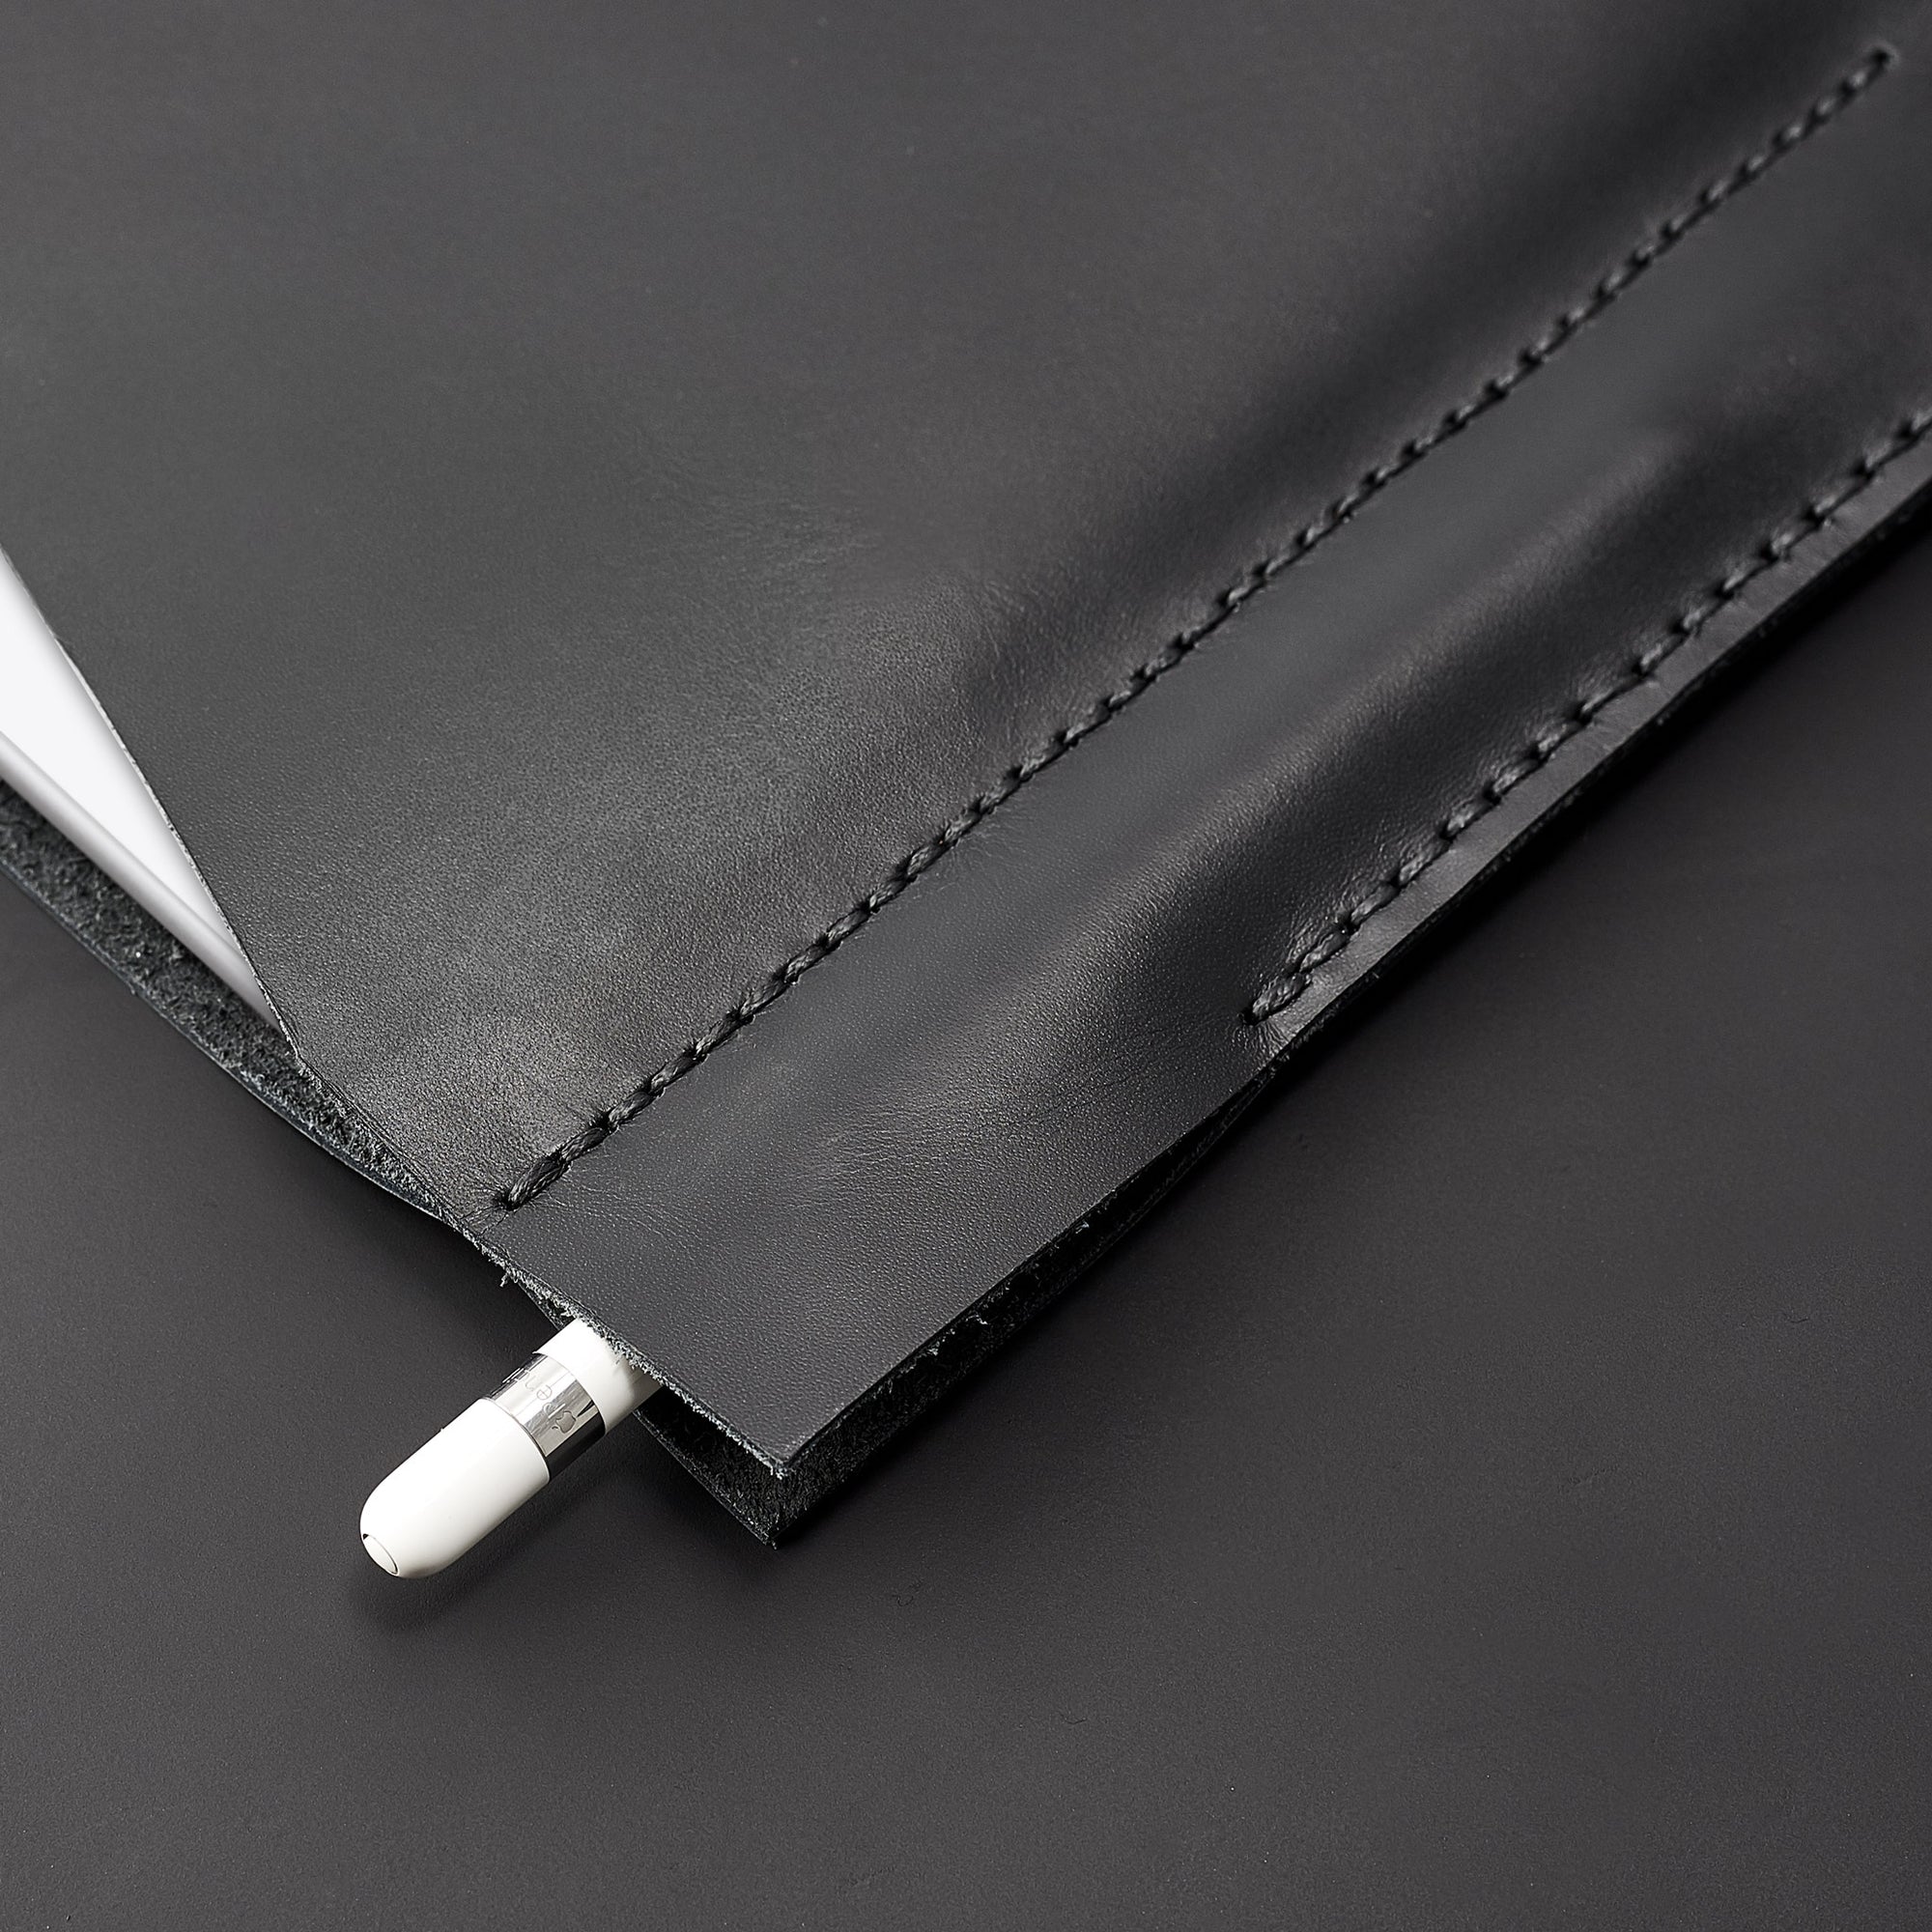 Apple pencil detail. Black iPad pro leather case with pen holder. Soft leather interior